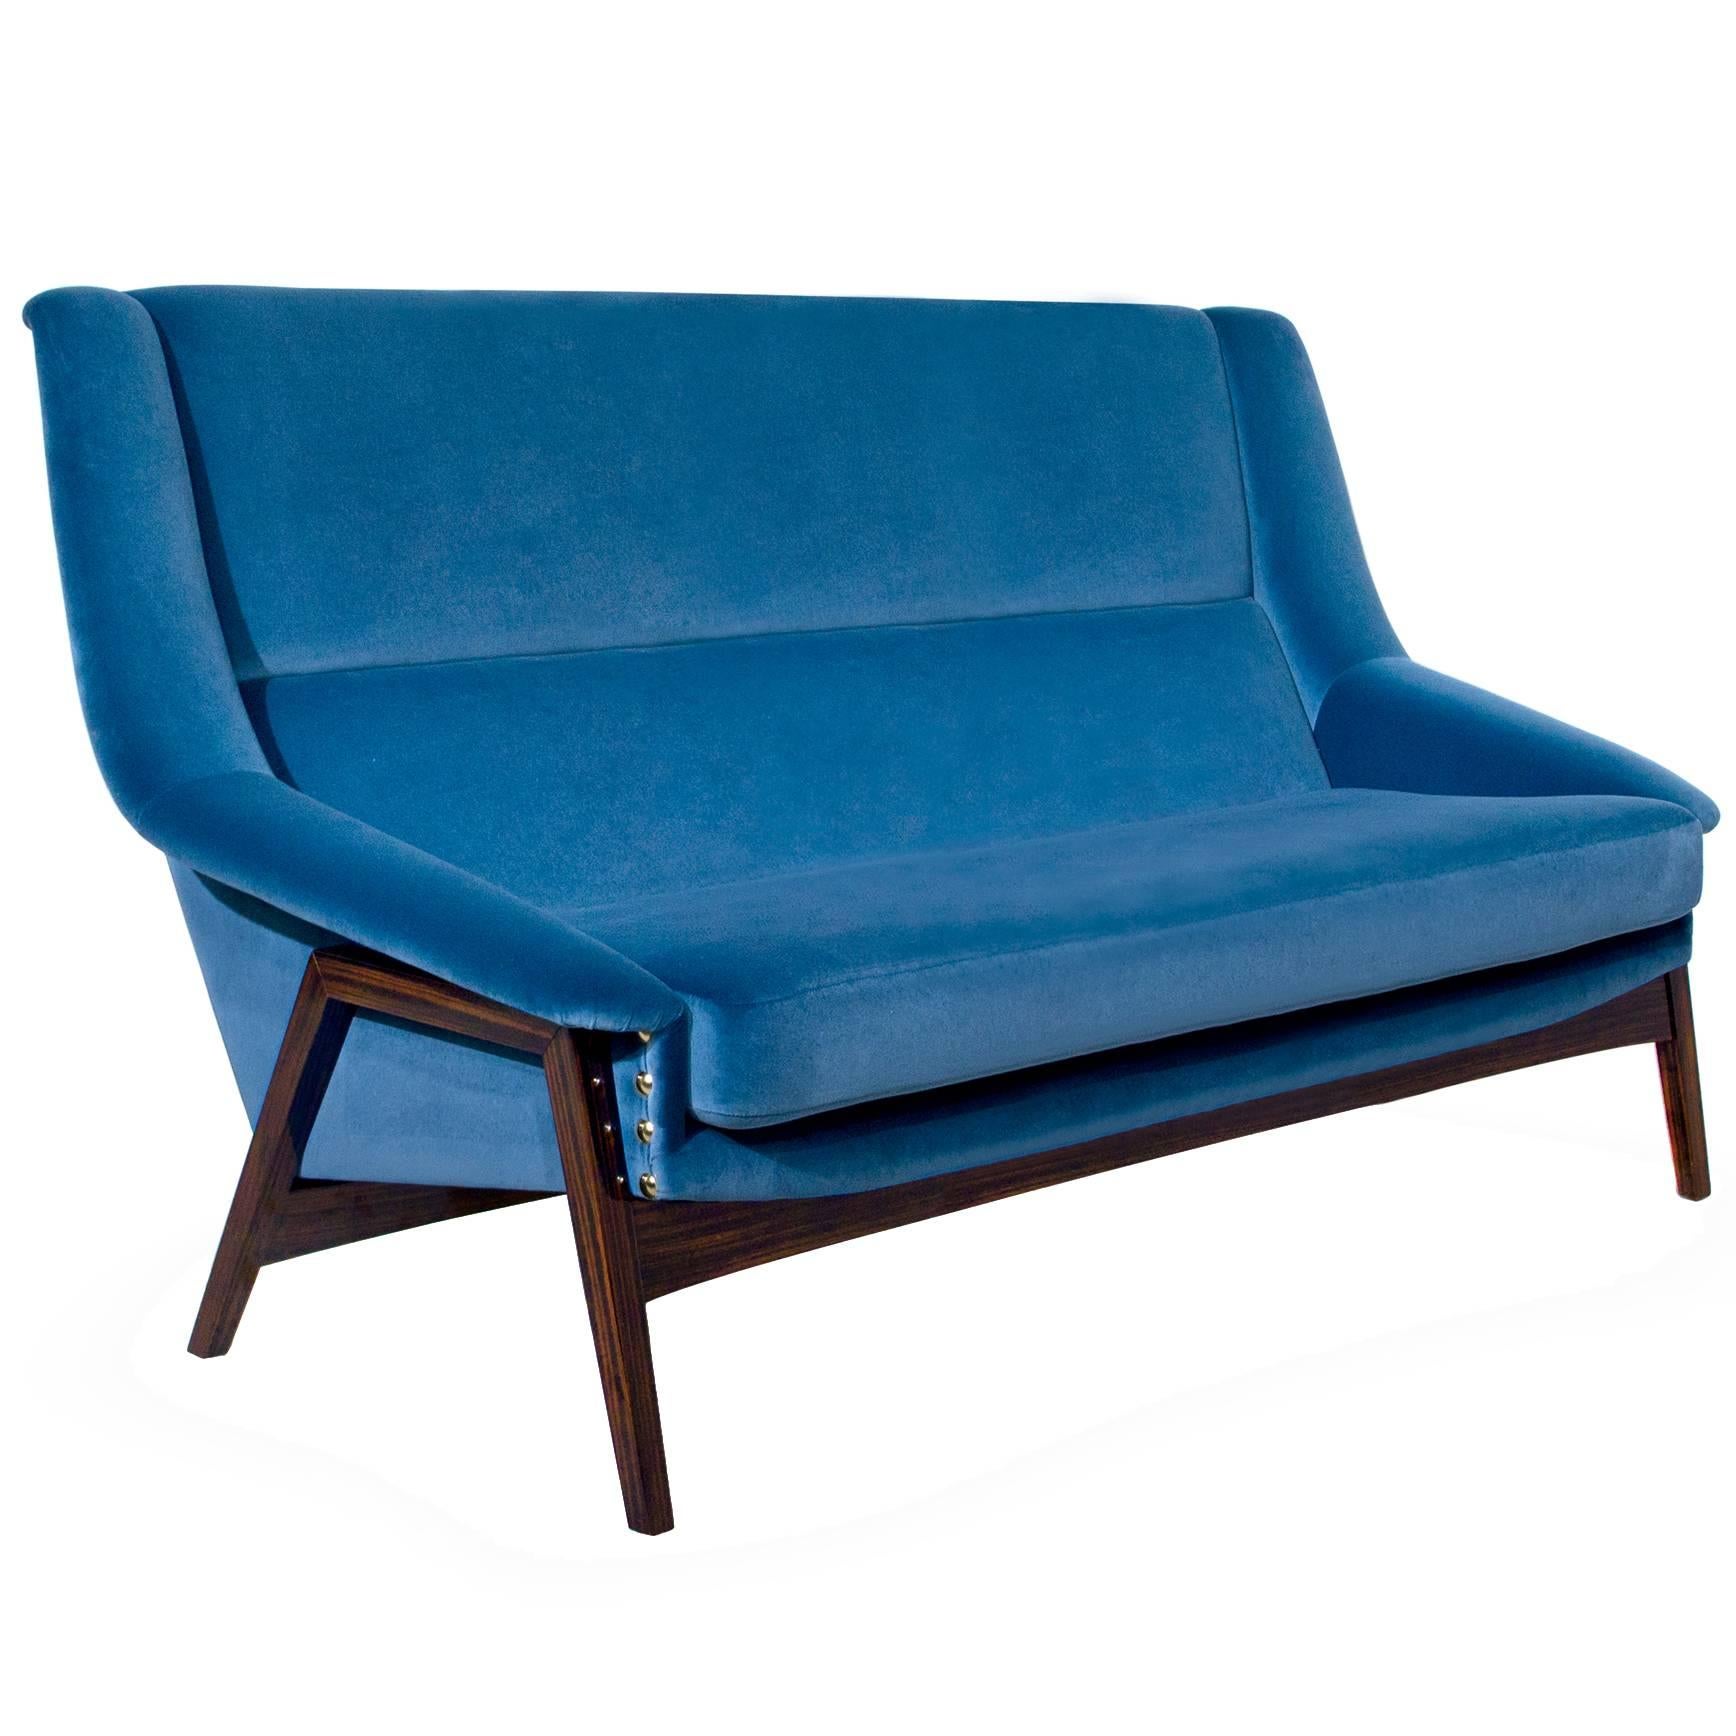 Prima Sofa Two Seater in Blue Cotton Velvet and Ebony Wood Veneer For Sale